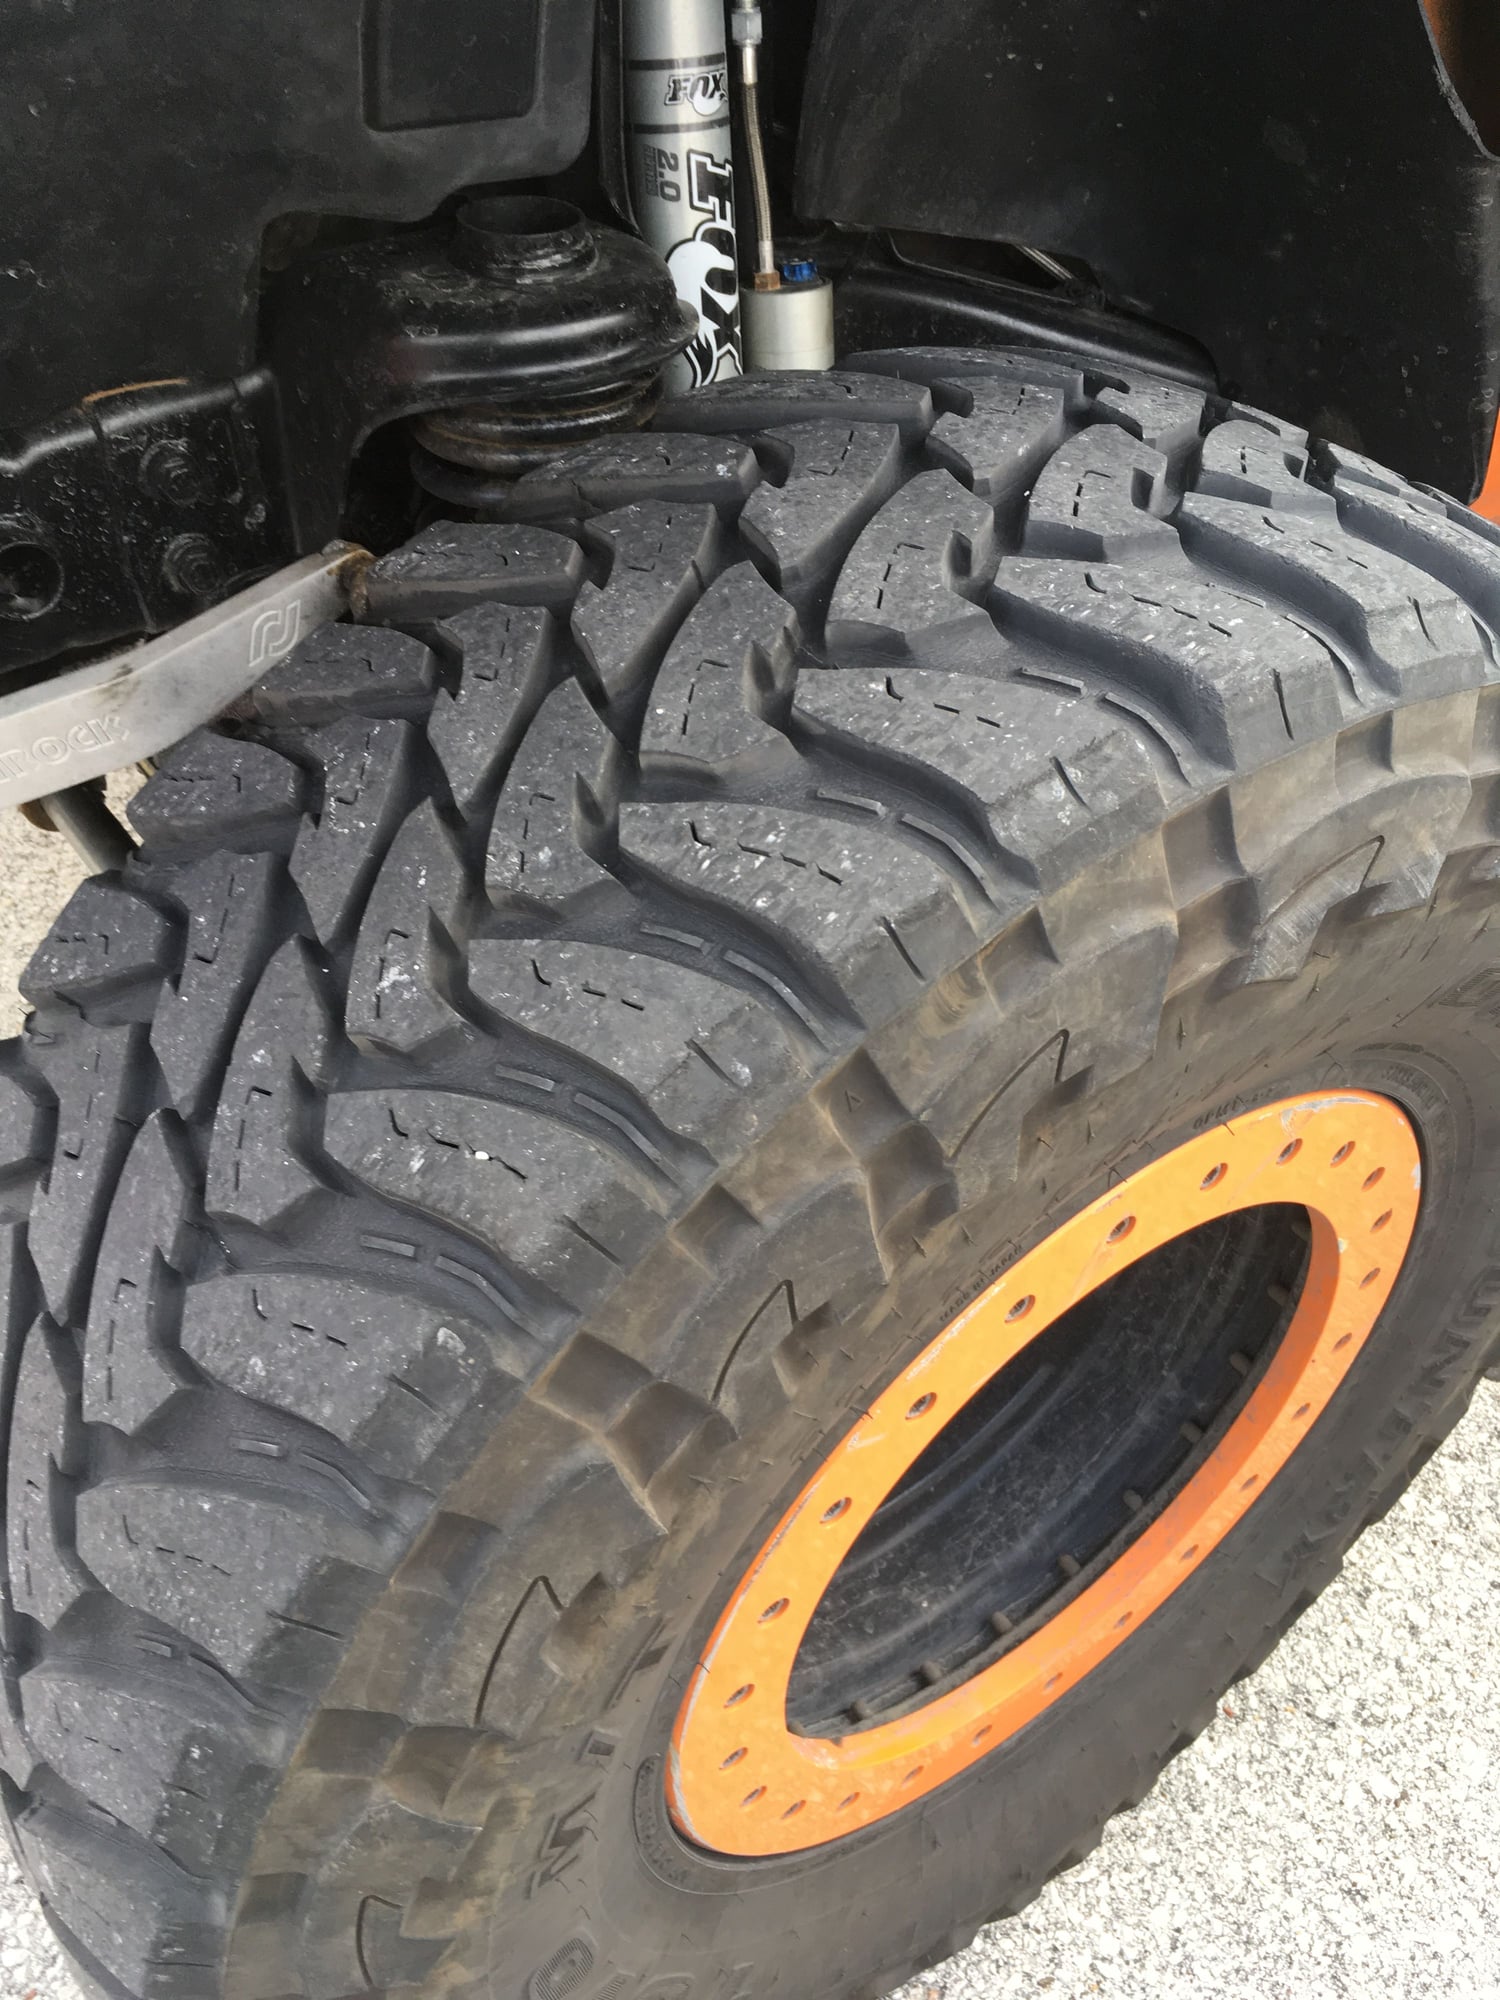 Wheels and Tires/Axles - Toyo Open County MTs 37x13.5r17 - Used - Dubuque, IA 52001, United States